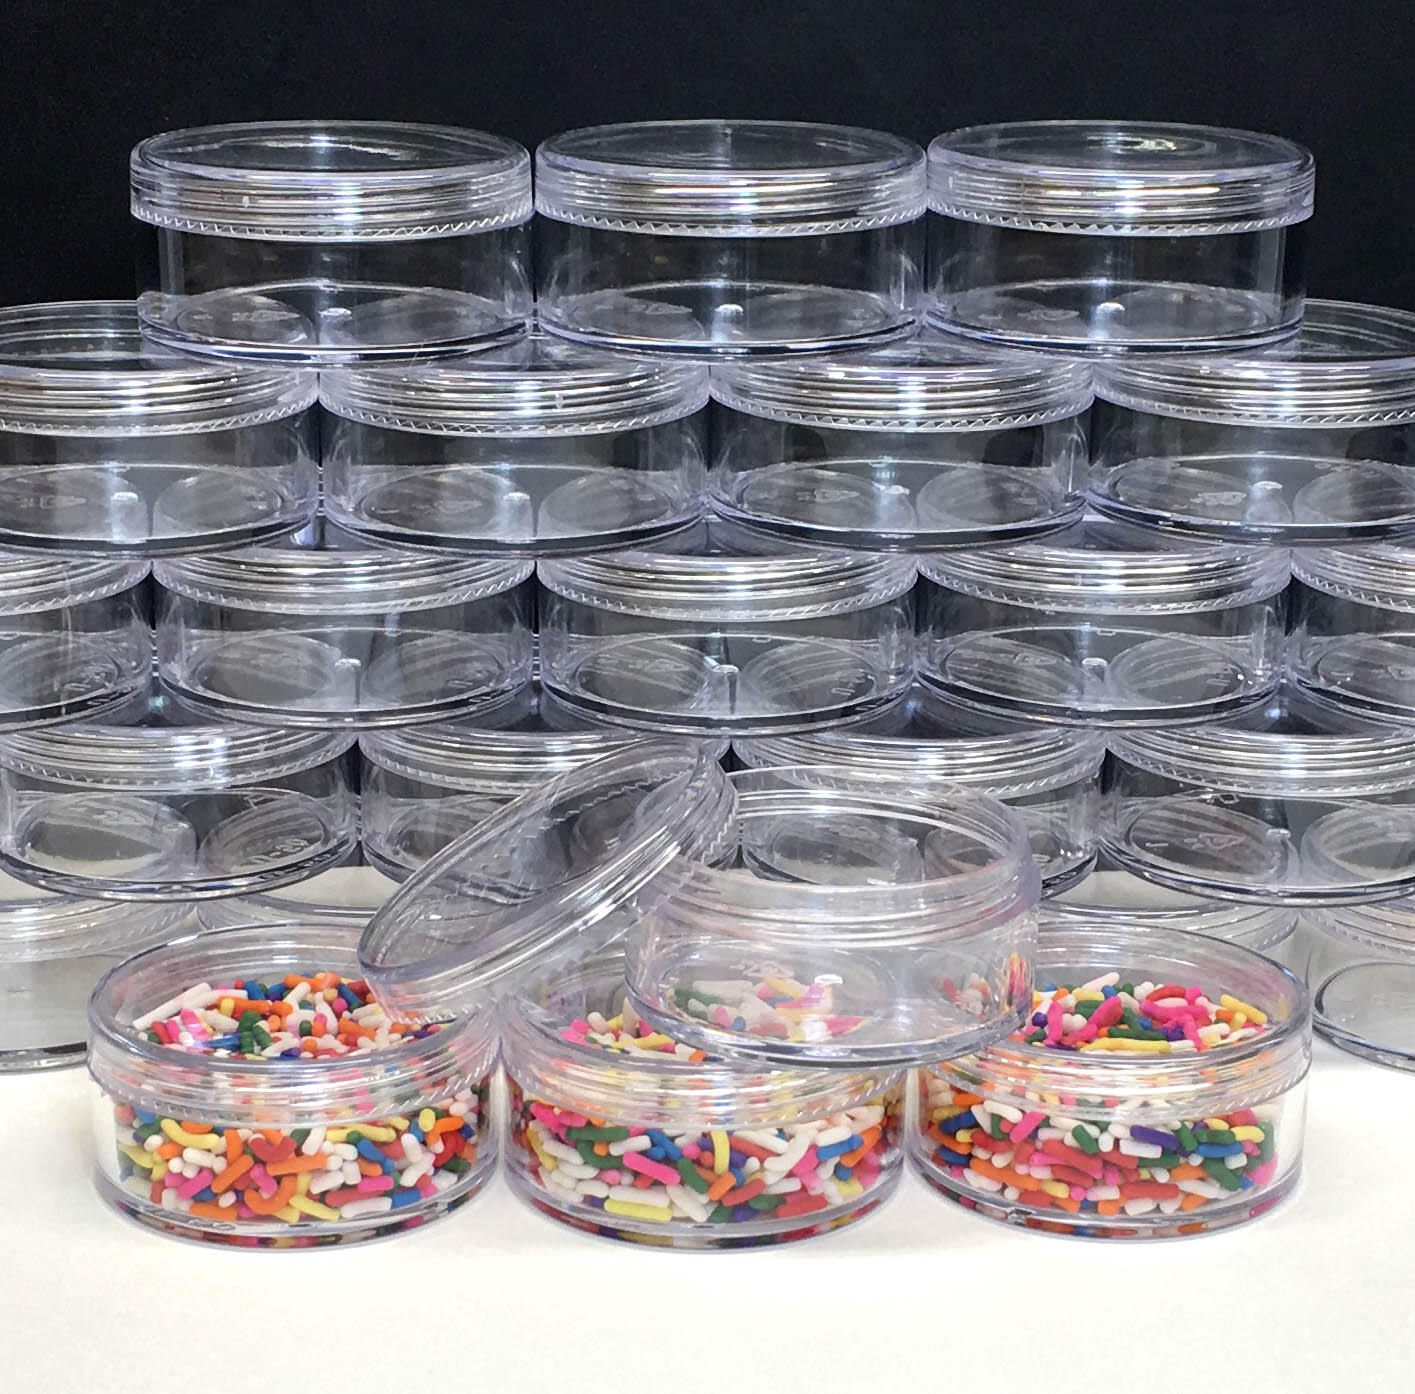 5 Cosmetic Jars with Sifter & Powder Puffs Option Plastic Beauty Storage Containers Clear Lids 50 Gram 50 Ml (3057-5) Discount Cosmetic Jars